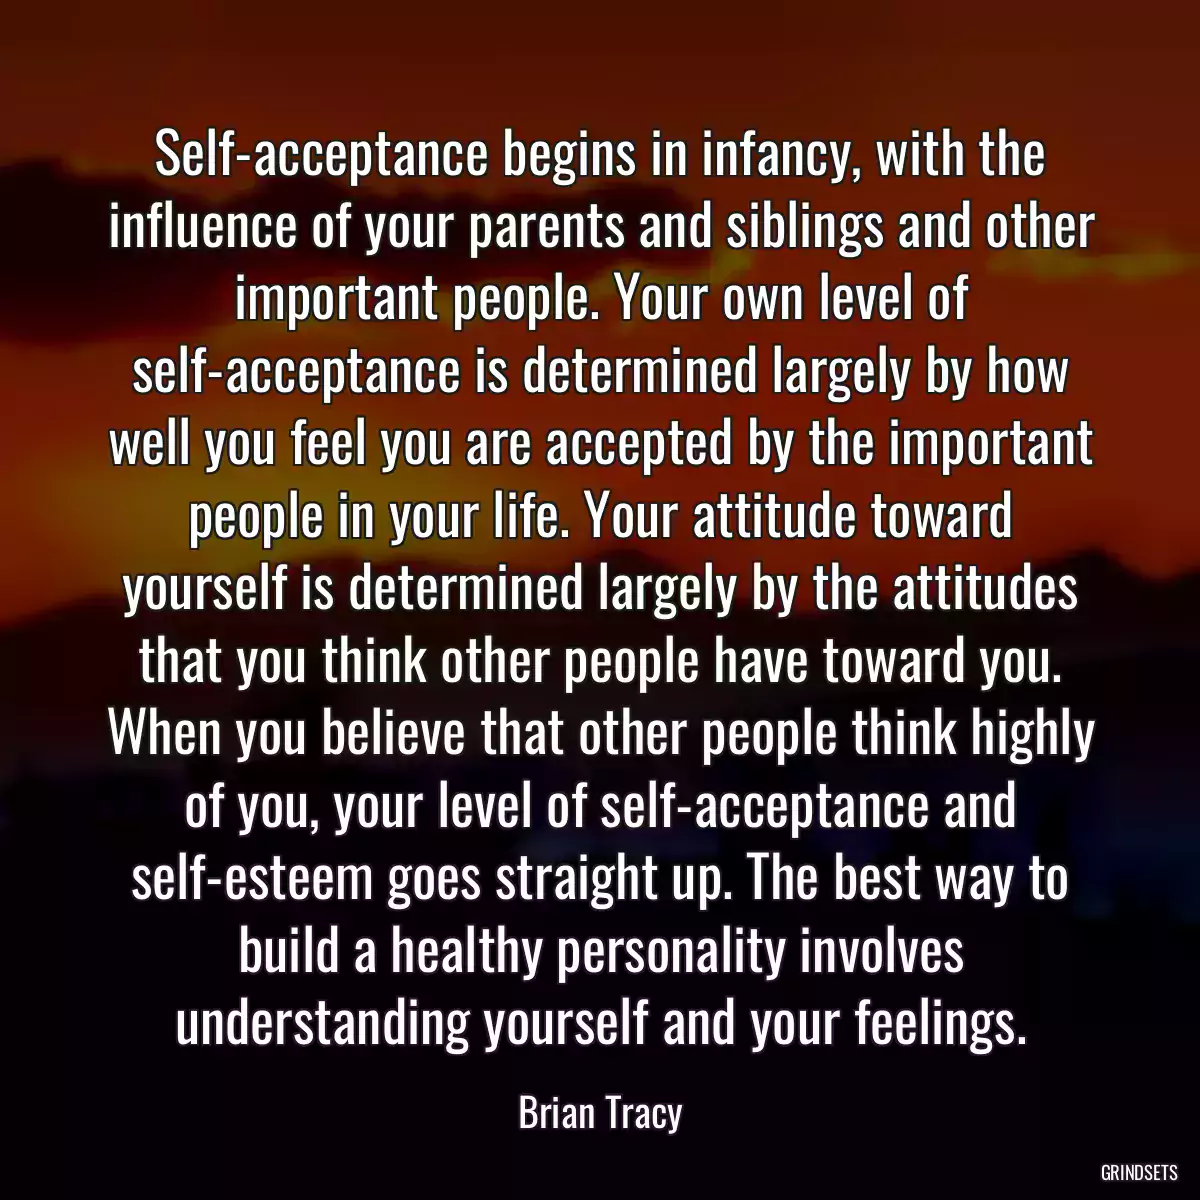 Self-acceptance begins in infancy, with the influence of your parents and siblings and other important people. Your own level of self-acceptance is determined largely by how well you feel you are accepted by the important people in your life. Your attitude toward yourself is determined largely by the attitudes that you think other people have toward you. When you believe that other people think highly of you, your level of self-acceptance and self-esteem goes straight up. The best way to build a healthy personality involves understanding yourself and your feelings.